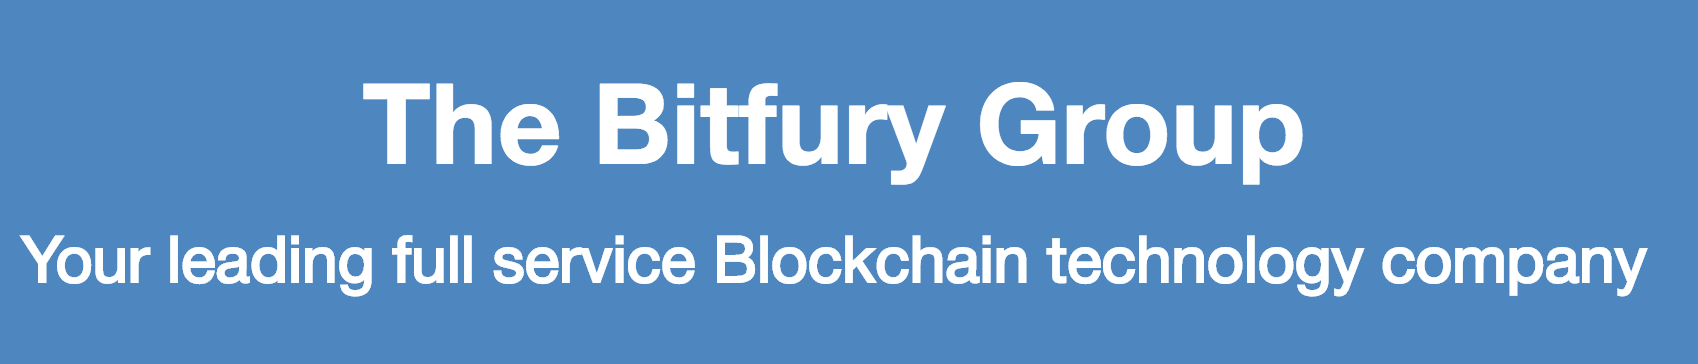 CRYPTONEWSBYTES.COM Screen-Shot-2018-03-01-at-10.51.11-PM Bitfury launches solution to help law-enforcement agencies in investigating crimes committed using Bitcoin  